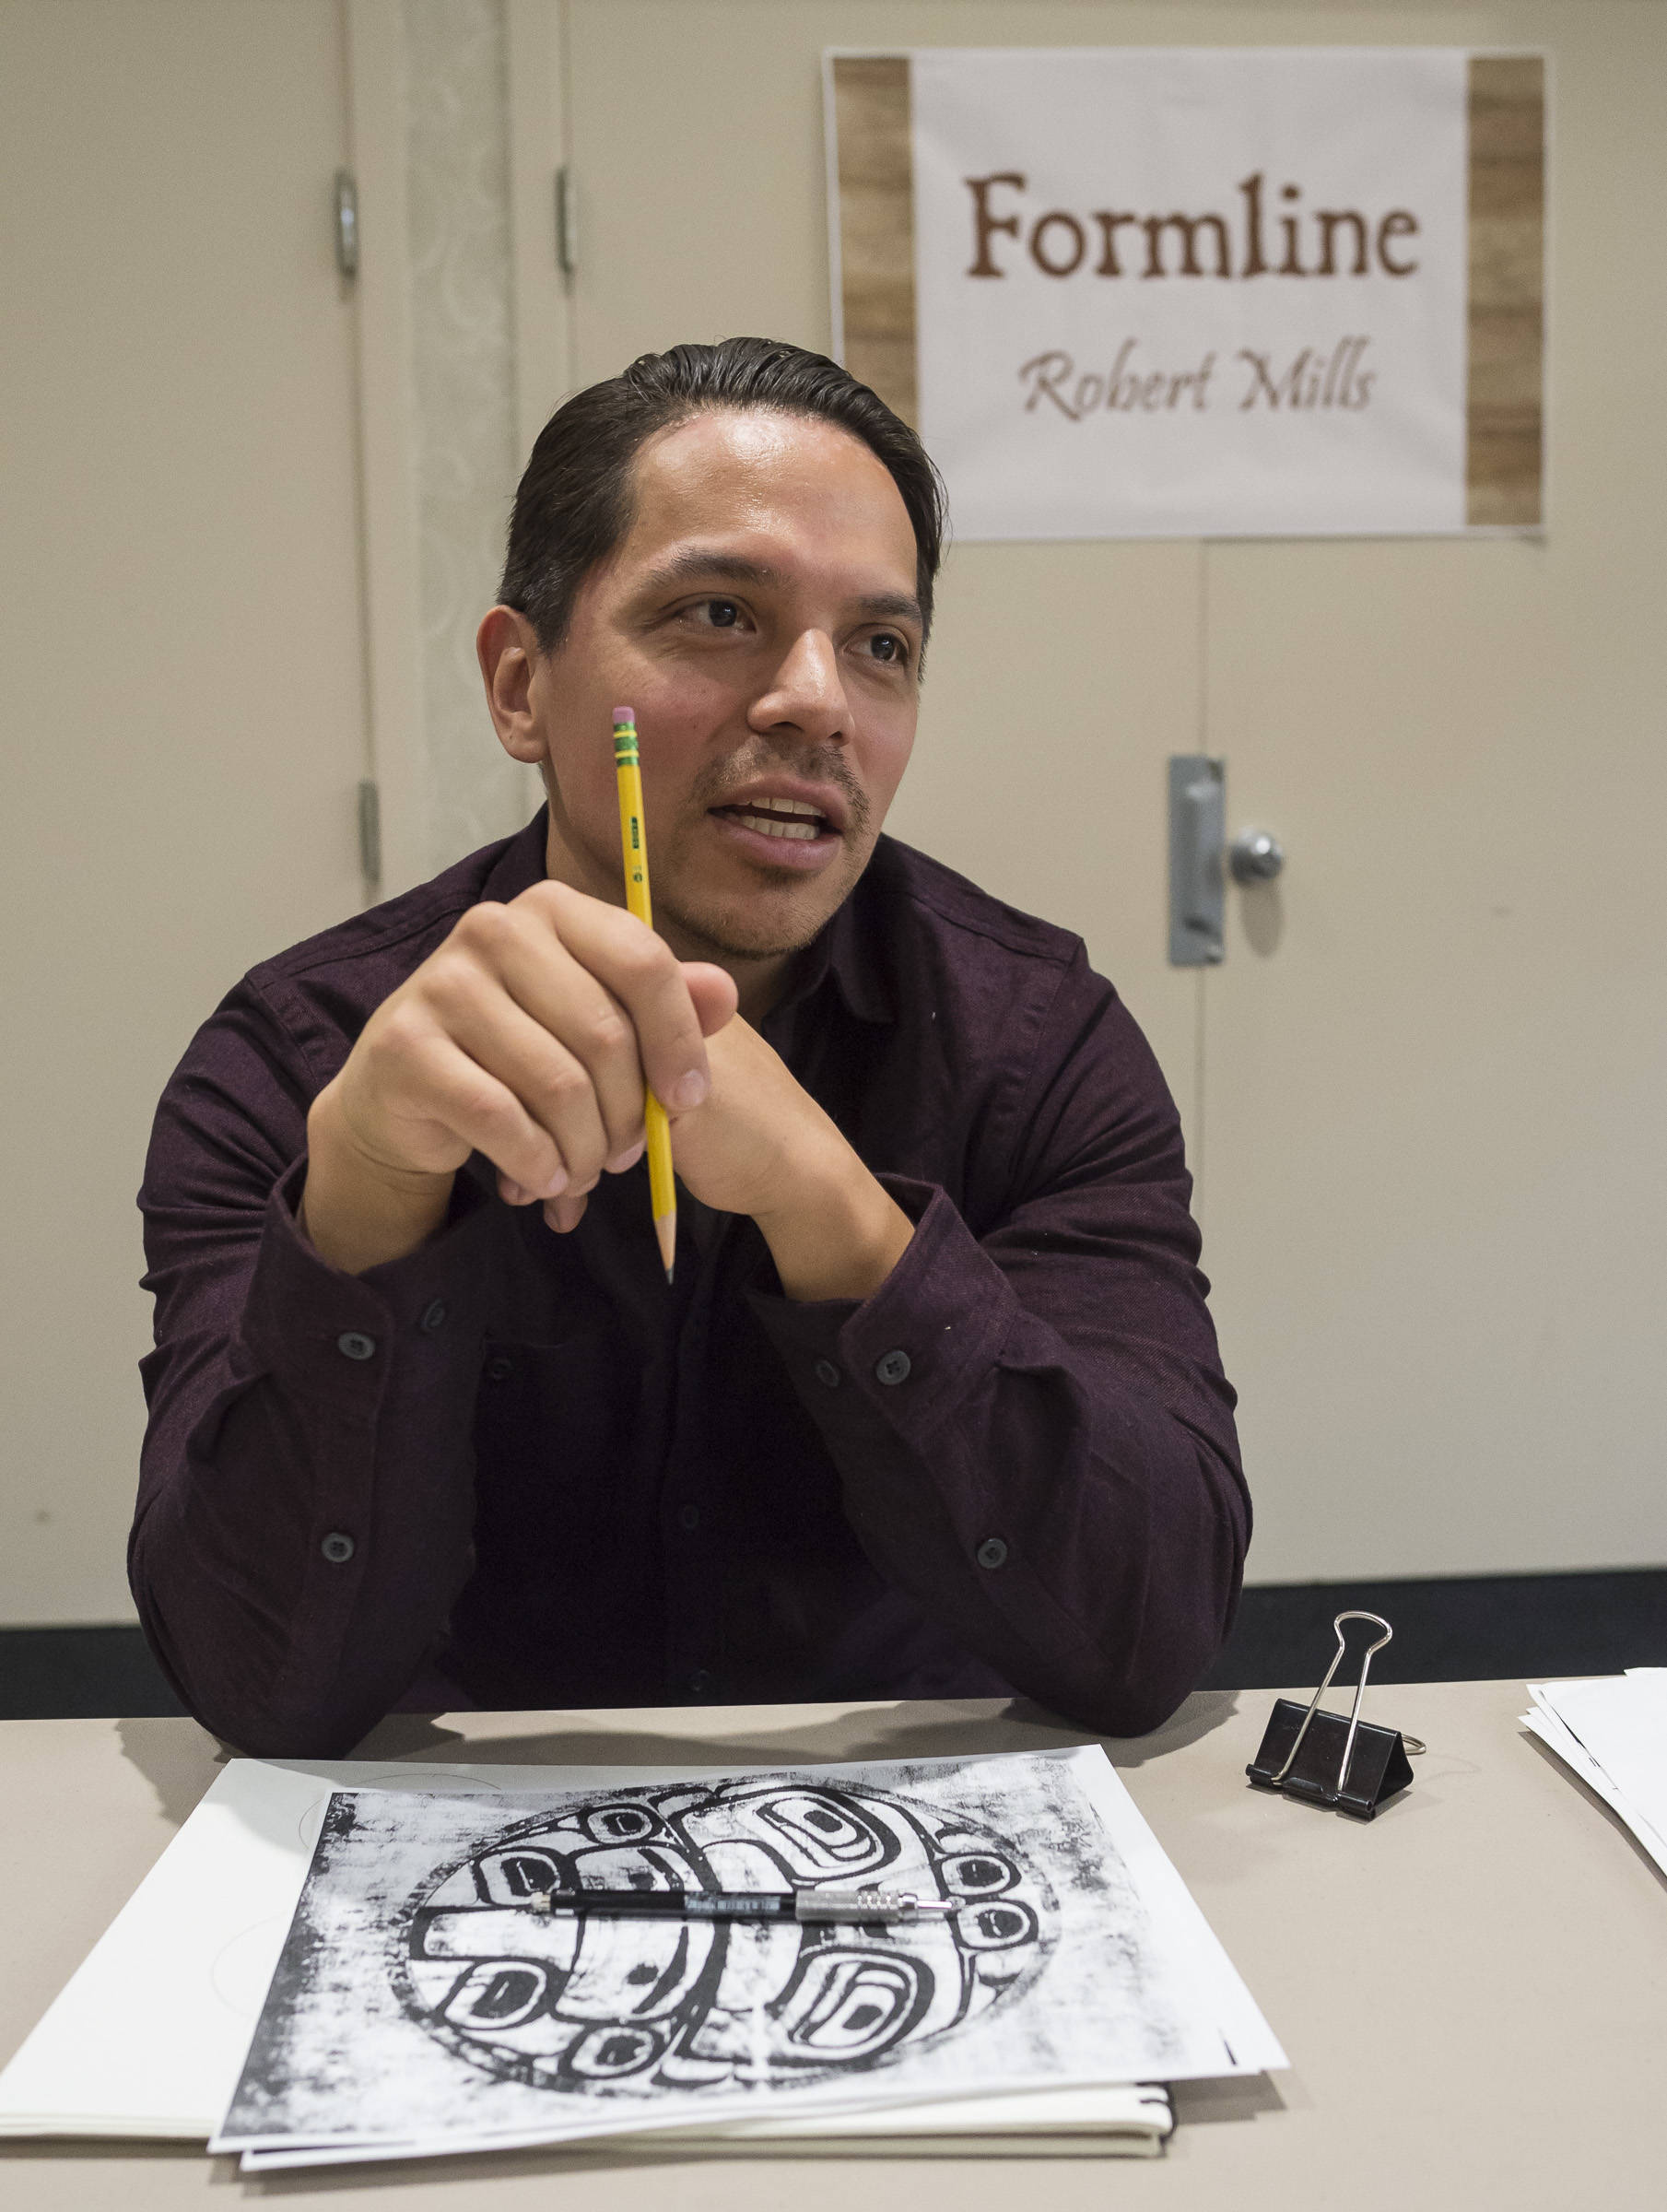 Robert Mills talks about what formline means to him at the Celebrating Our Ways of Life for Native American Heritage Month at the Elizabeth Peratrovich Hall on Friday, Nov. 16, 2018. (Michael Penn | Juneau Empire)